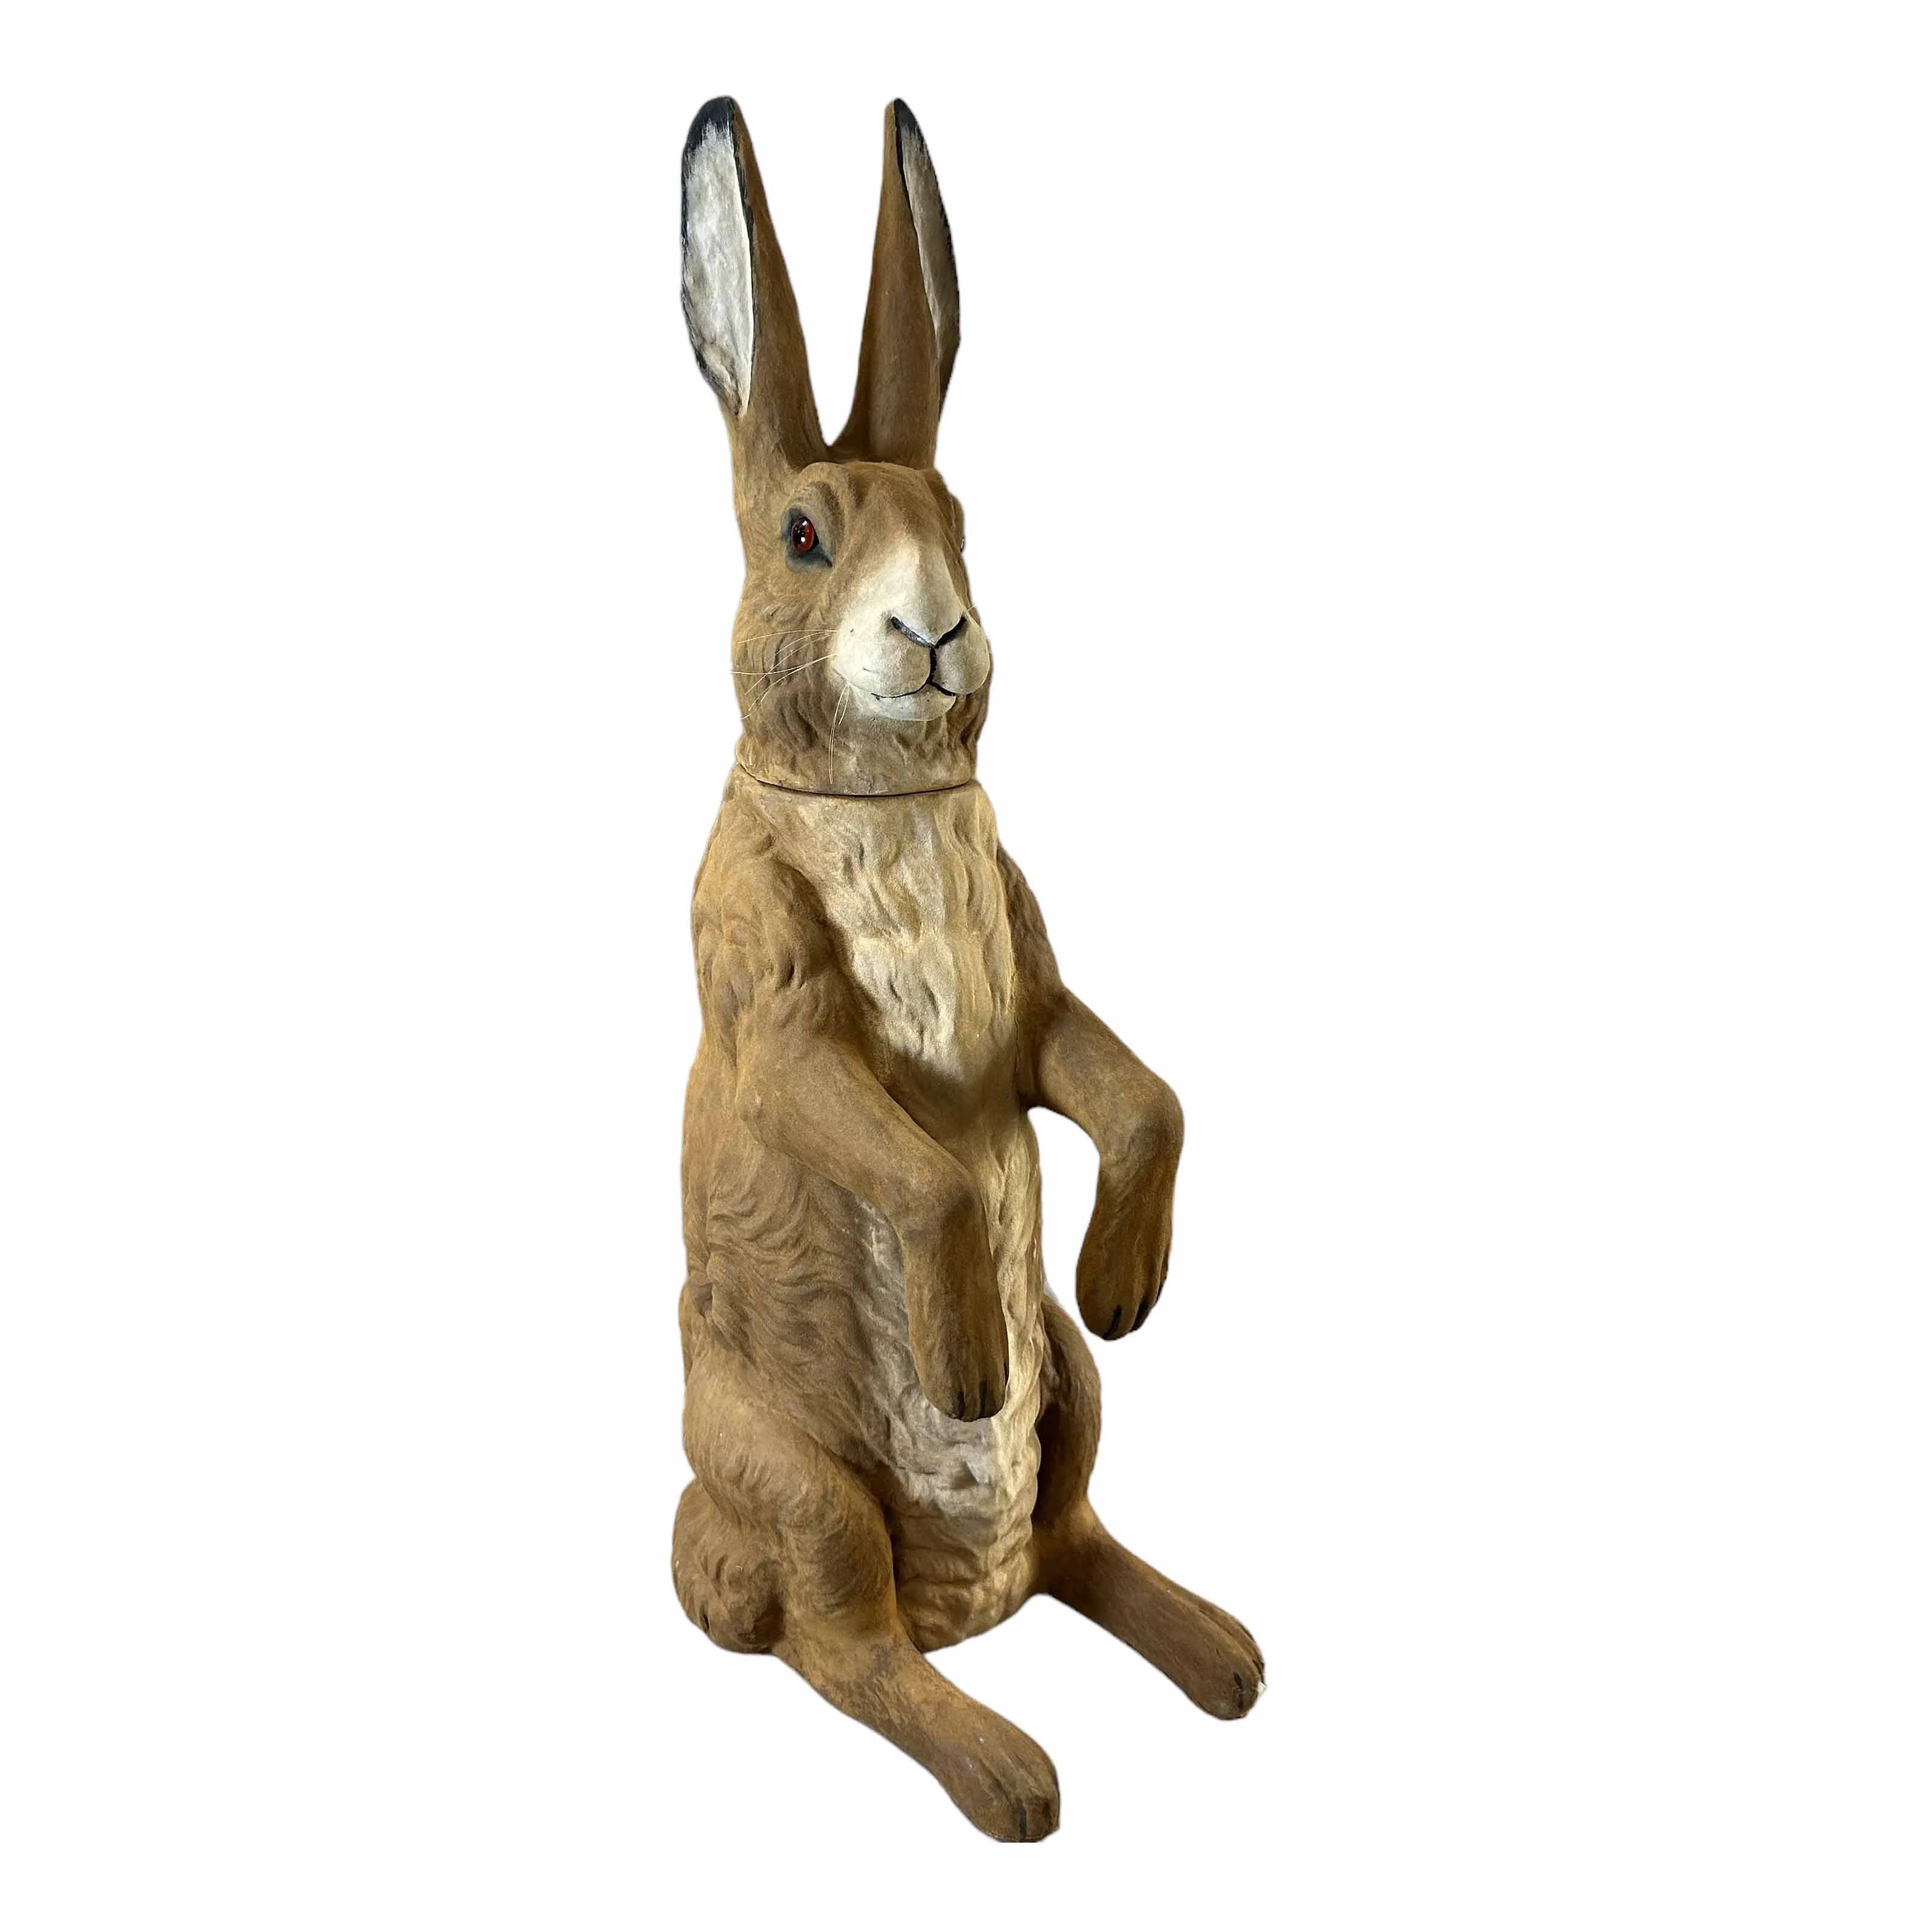 37in rabbit candy container, which sold for $28,000 ($33,600 with buyer’s premium) at Bertoia.